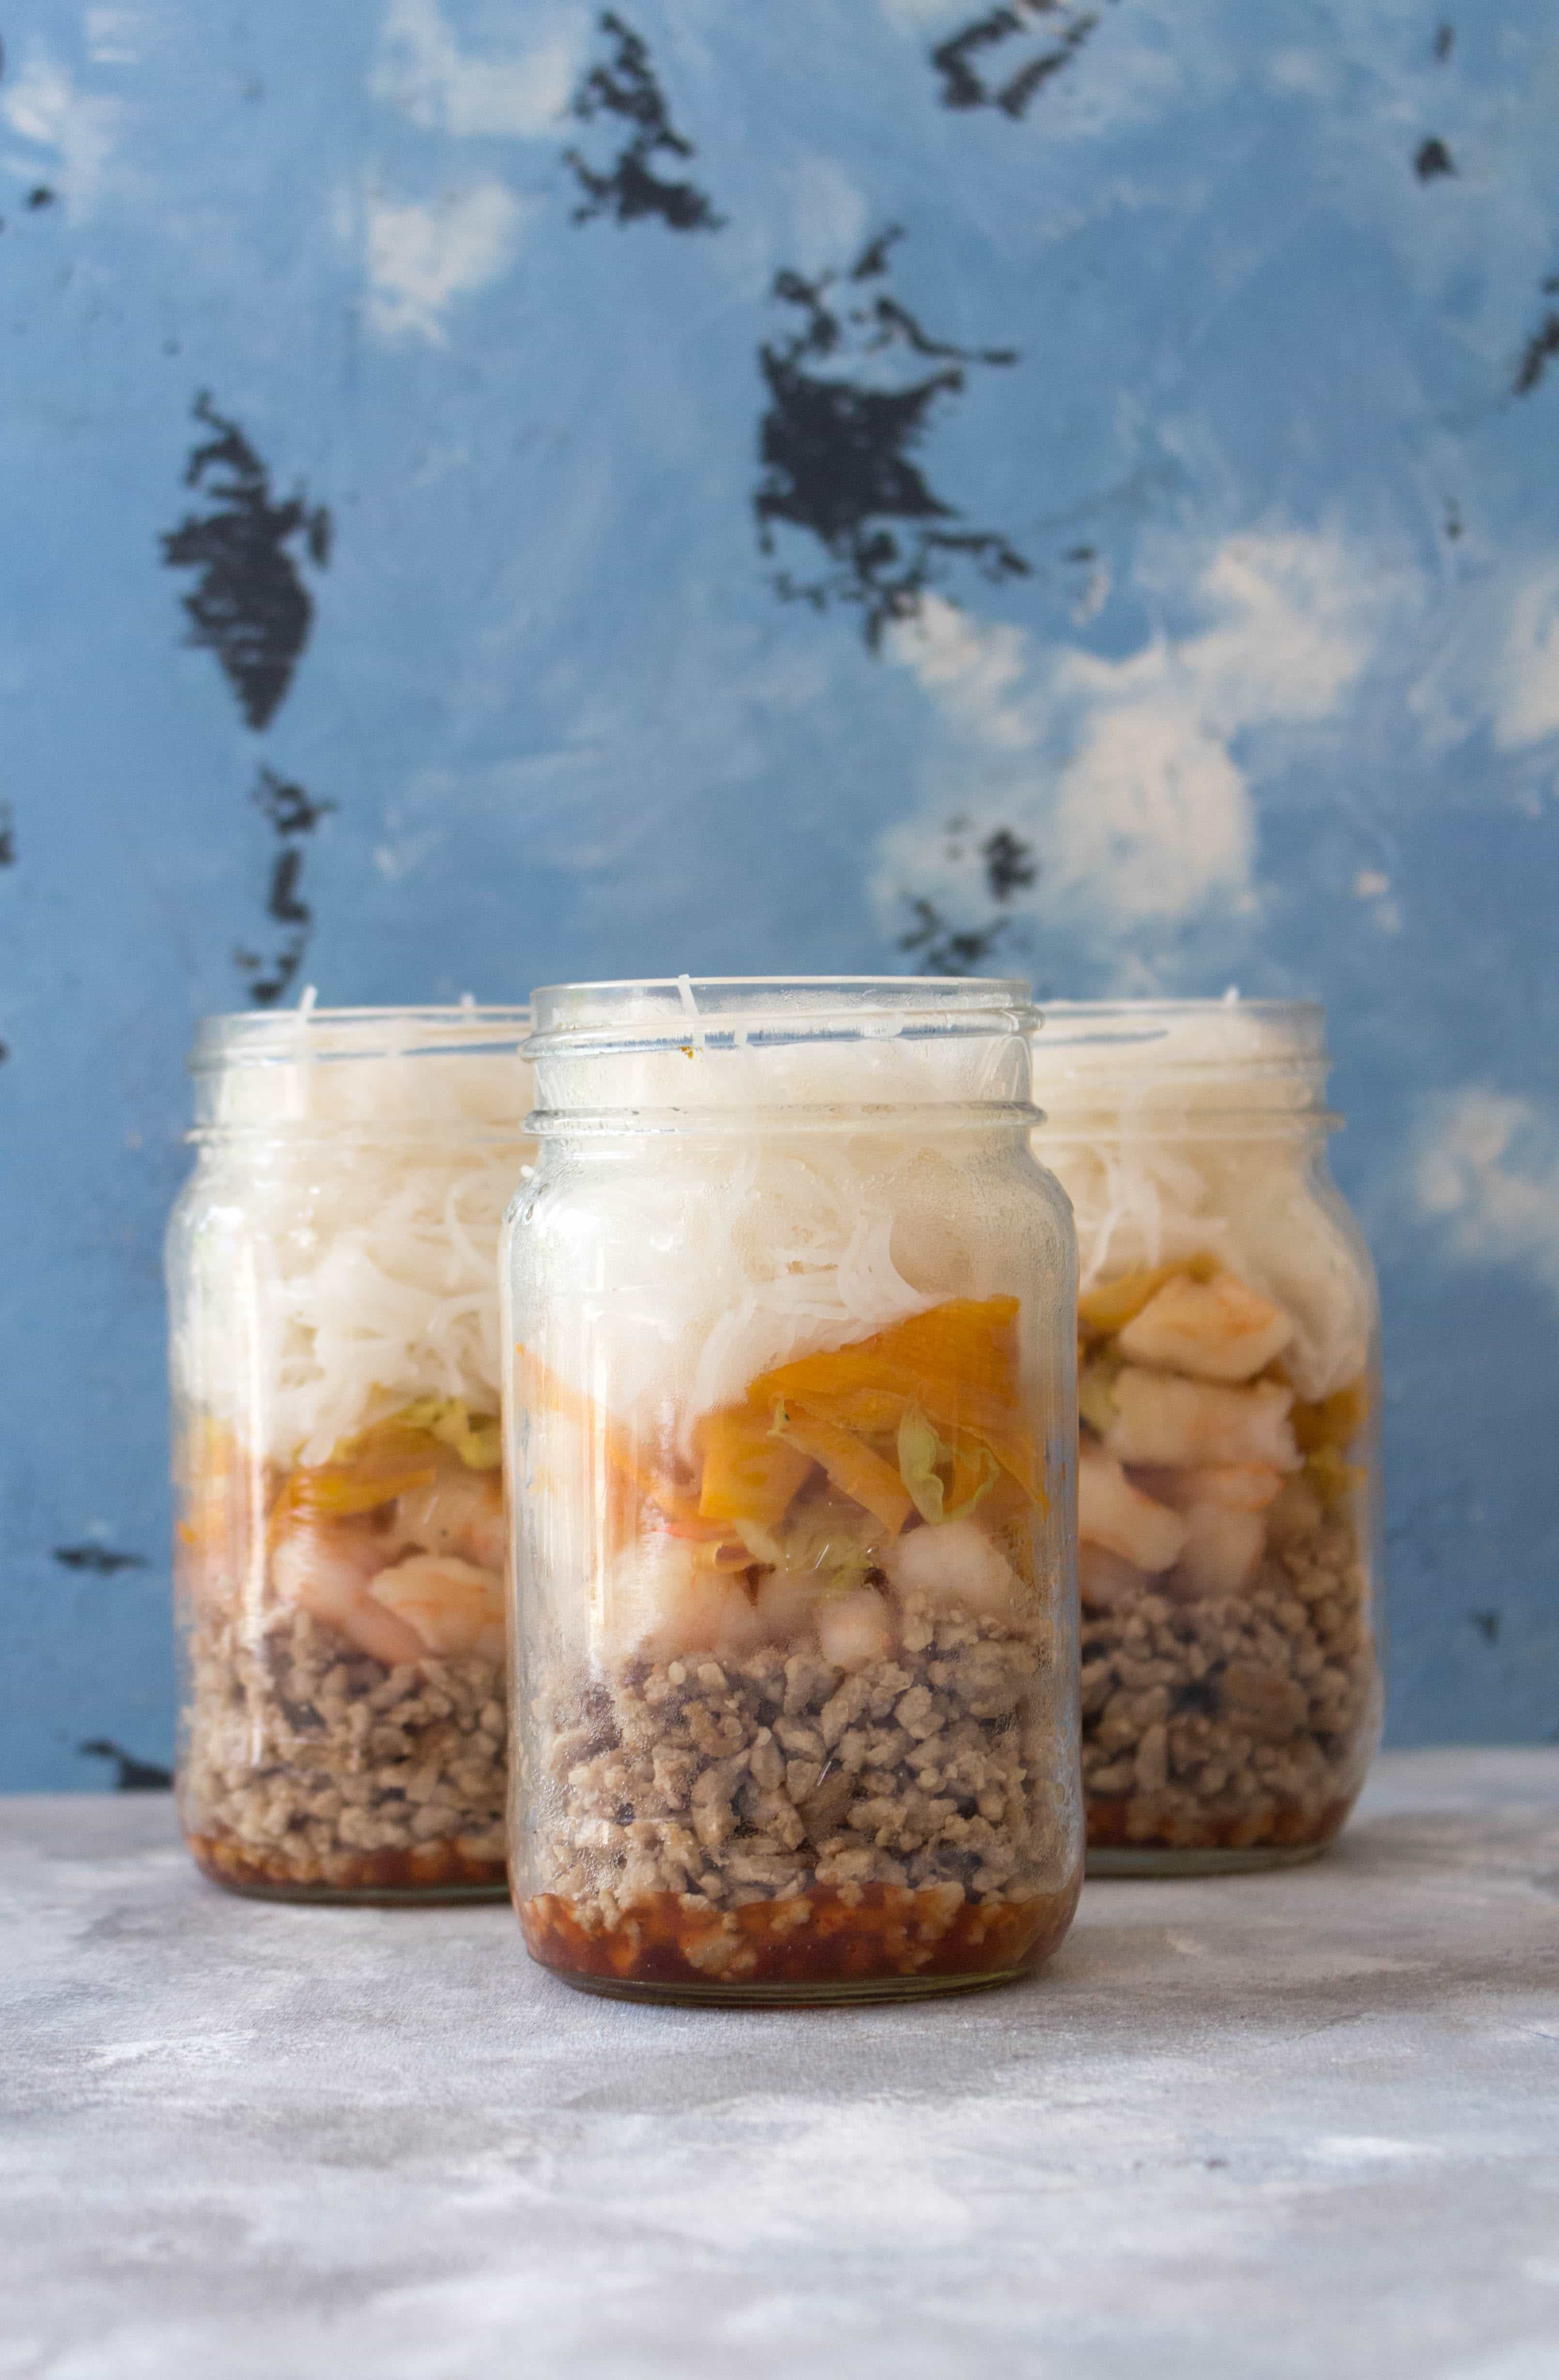 This easy deconstructed spring roll in a jar is a fun and delicious way to get your spring roll fix without having to fry or wrap a roll!